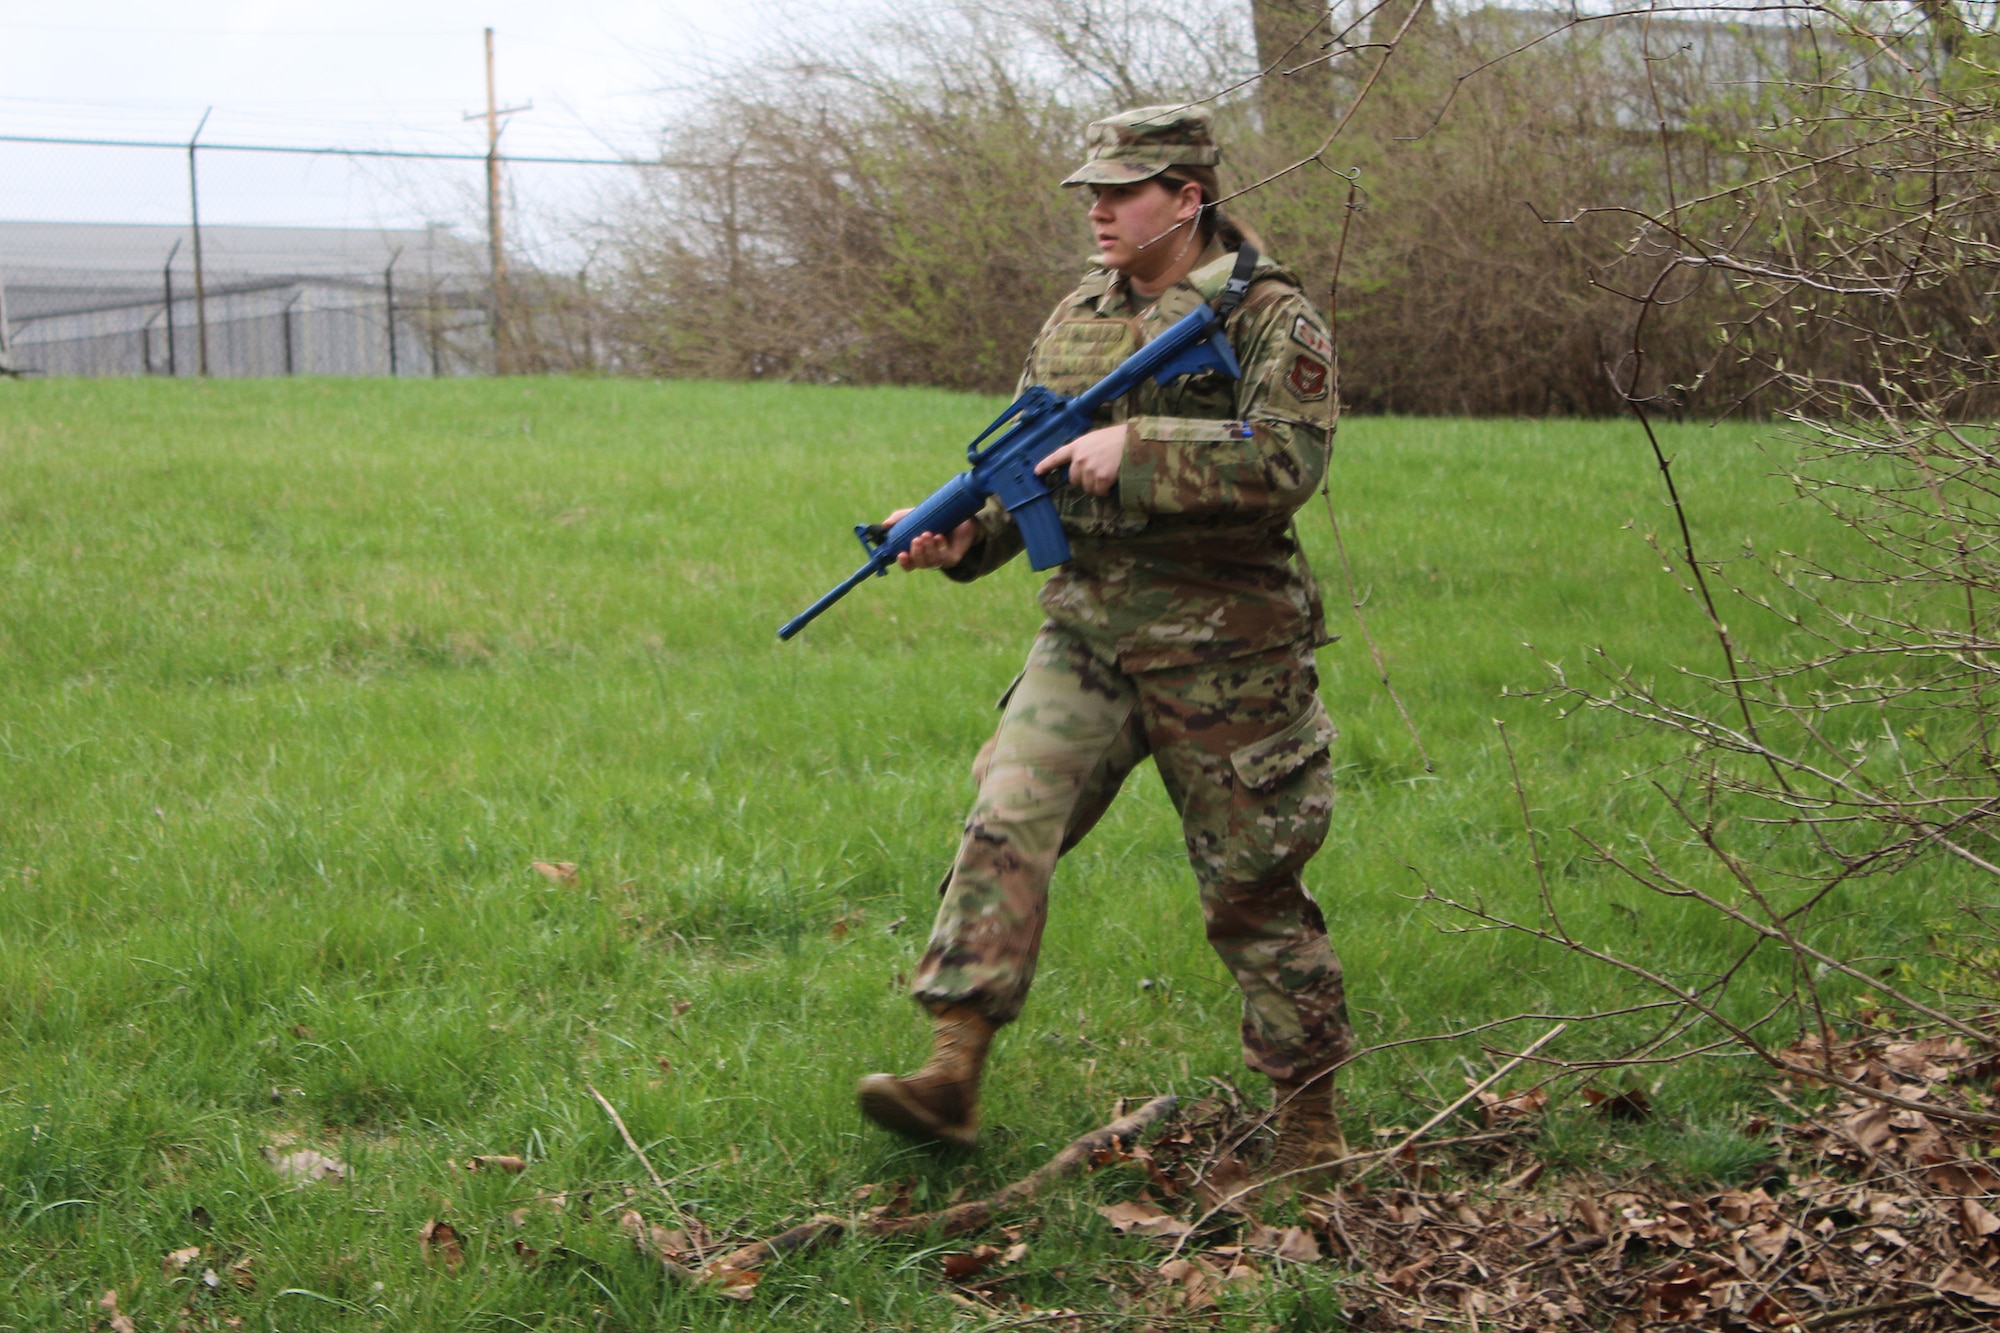 Staff Sgt. Krista Tangent, a defender from the 445th Security Forces Squadron, follows in a file formation during field movement training on April 2, 2023. Despite the wet and cold weather, defenders from the 445th practiced skill such as maneuvers, fire teams, formations, cover and concealment, and critical thinking.